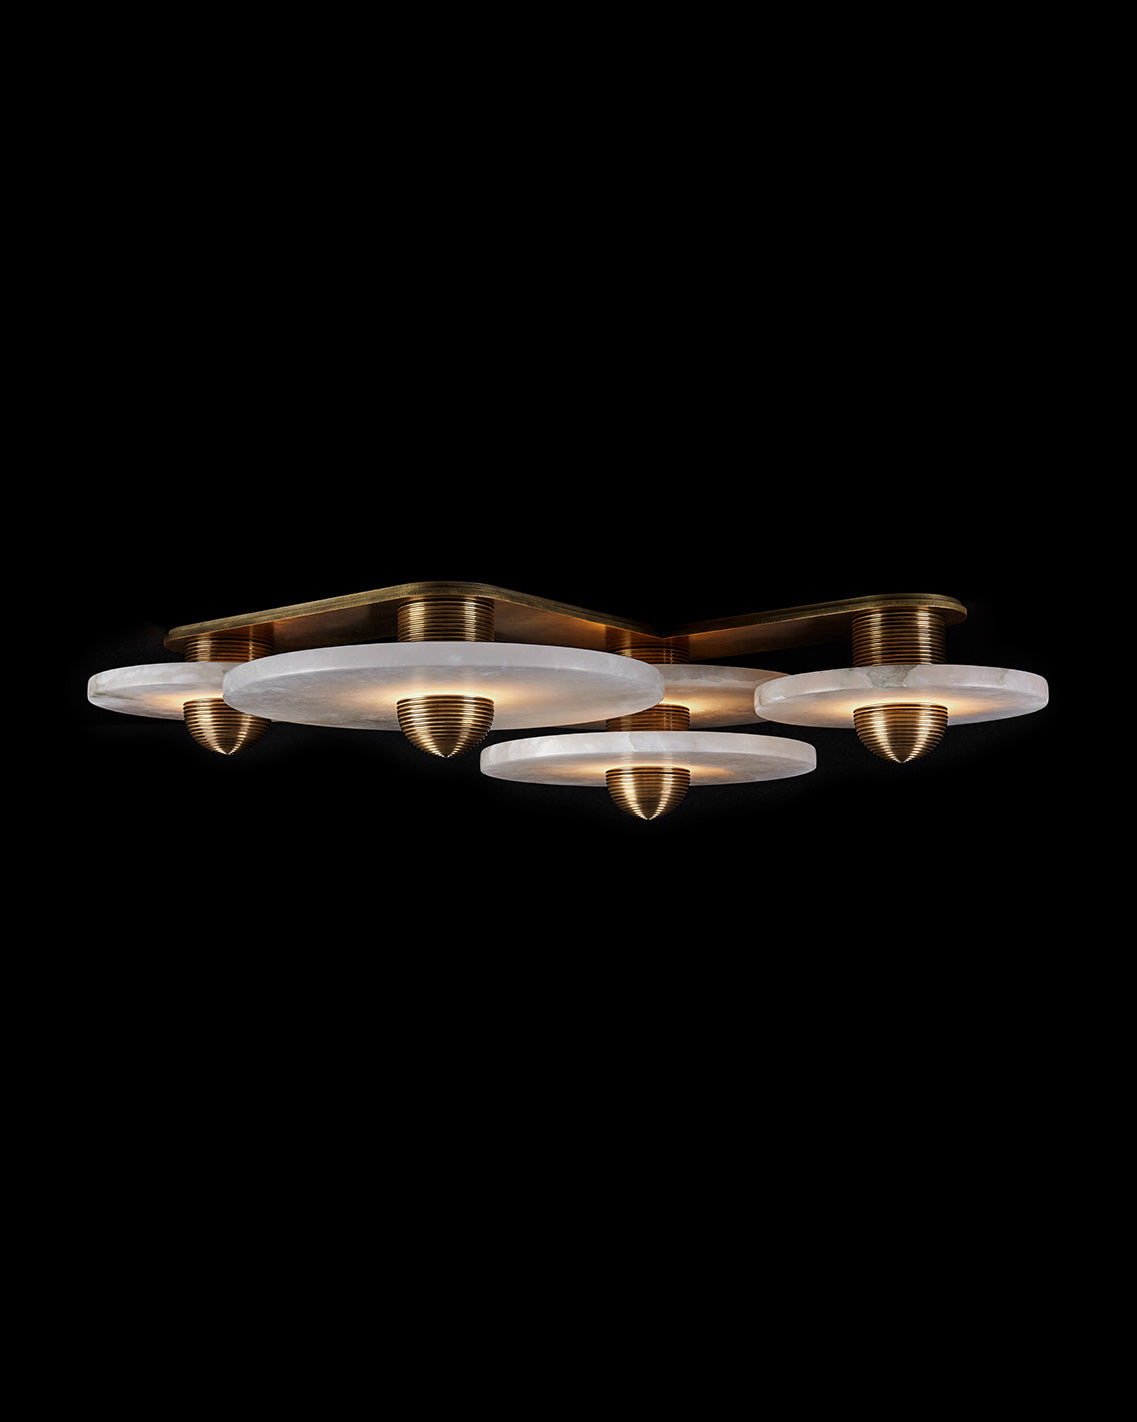 MEDIAN : 4 surface light in Aged Brass finish, mounted to a black ceiling. 